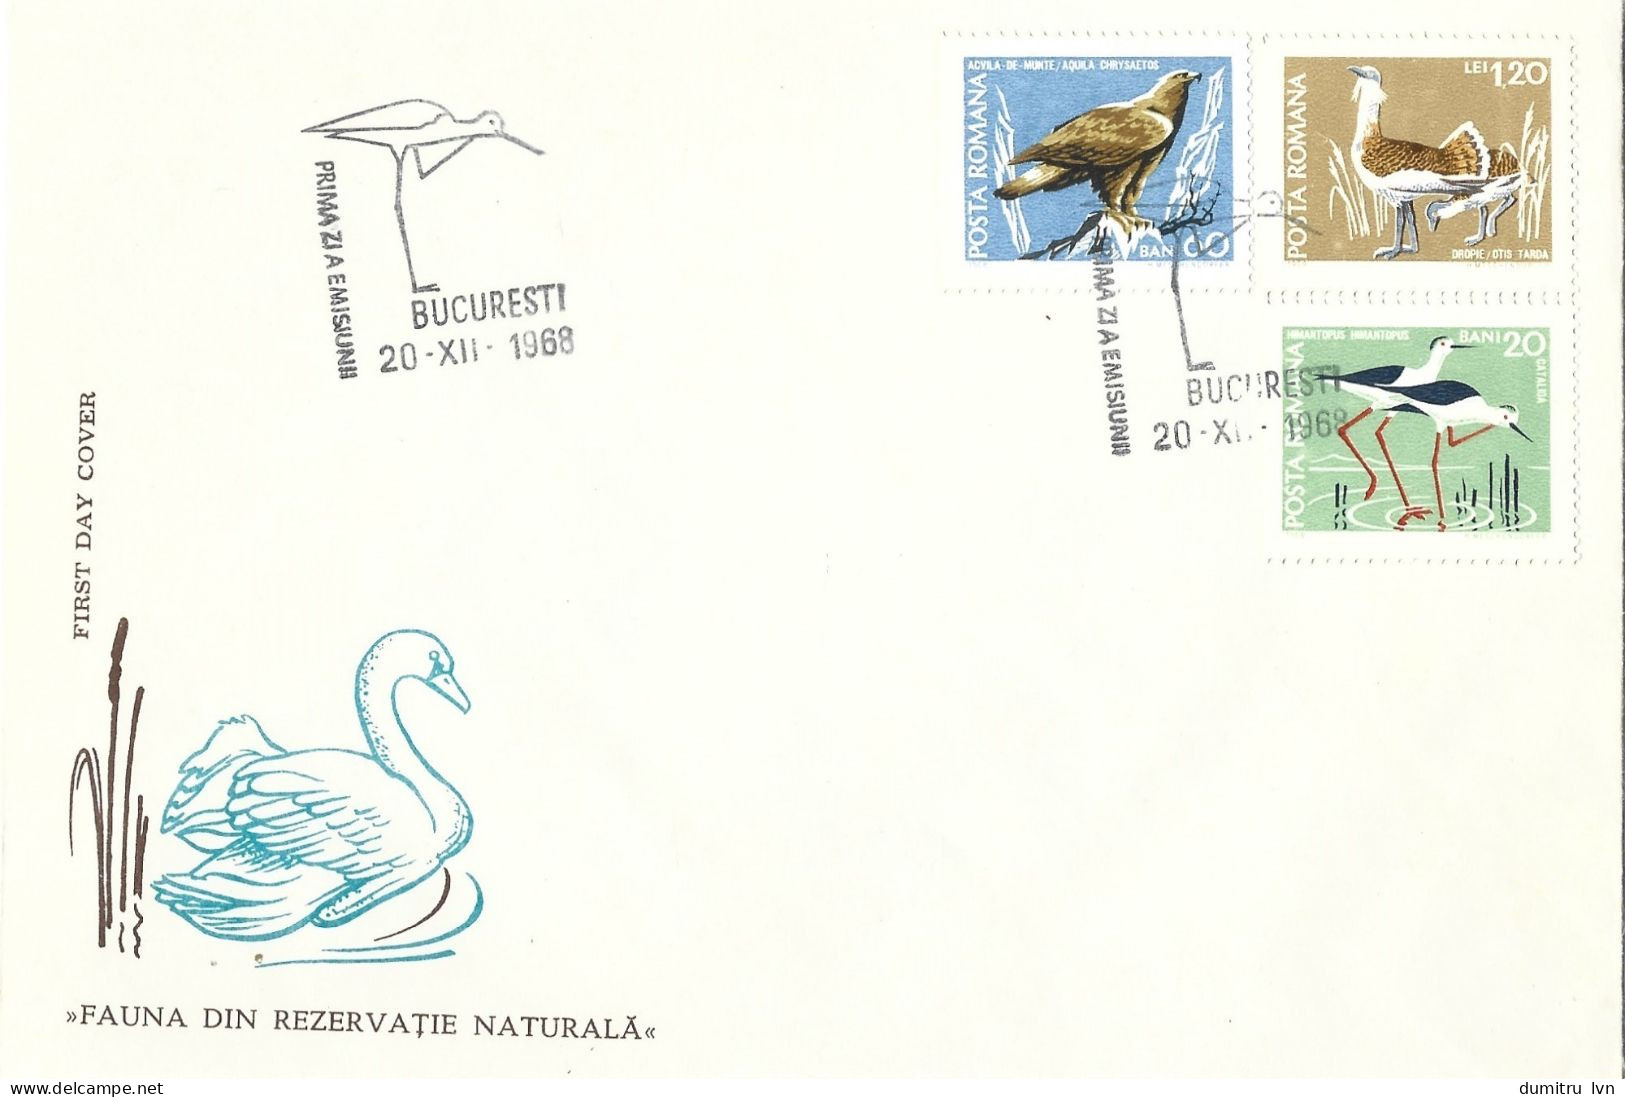 ROMANIA 1968 - COVER FDC, FAUNA FROM THE NATURE RESERVE, EAGLE, BUSTARD - Cisnes